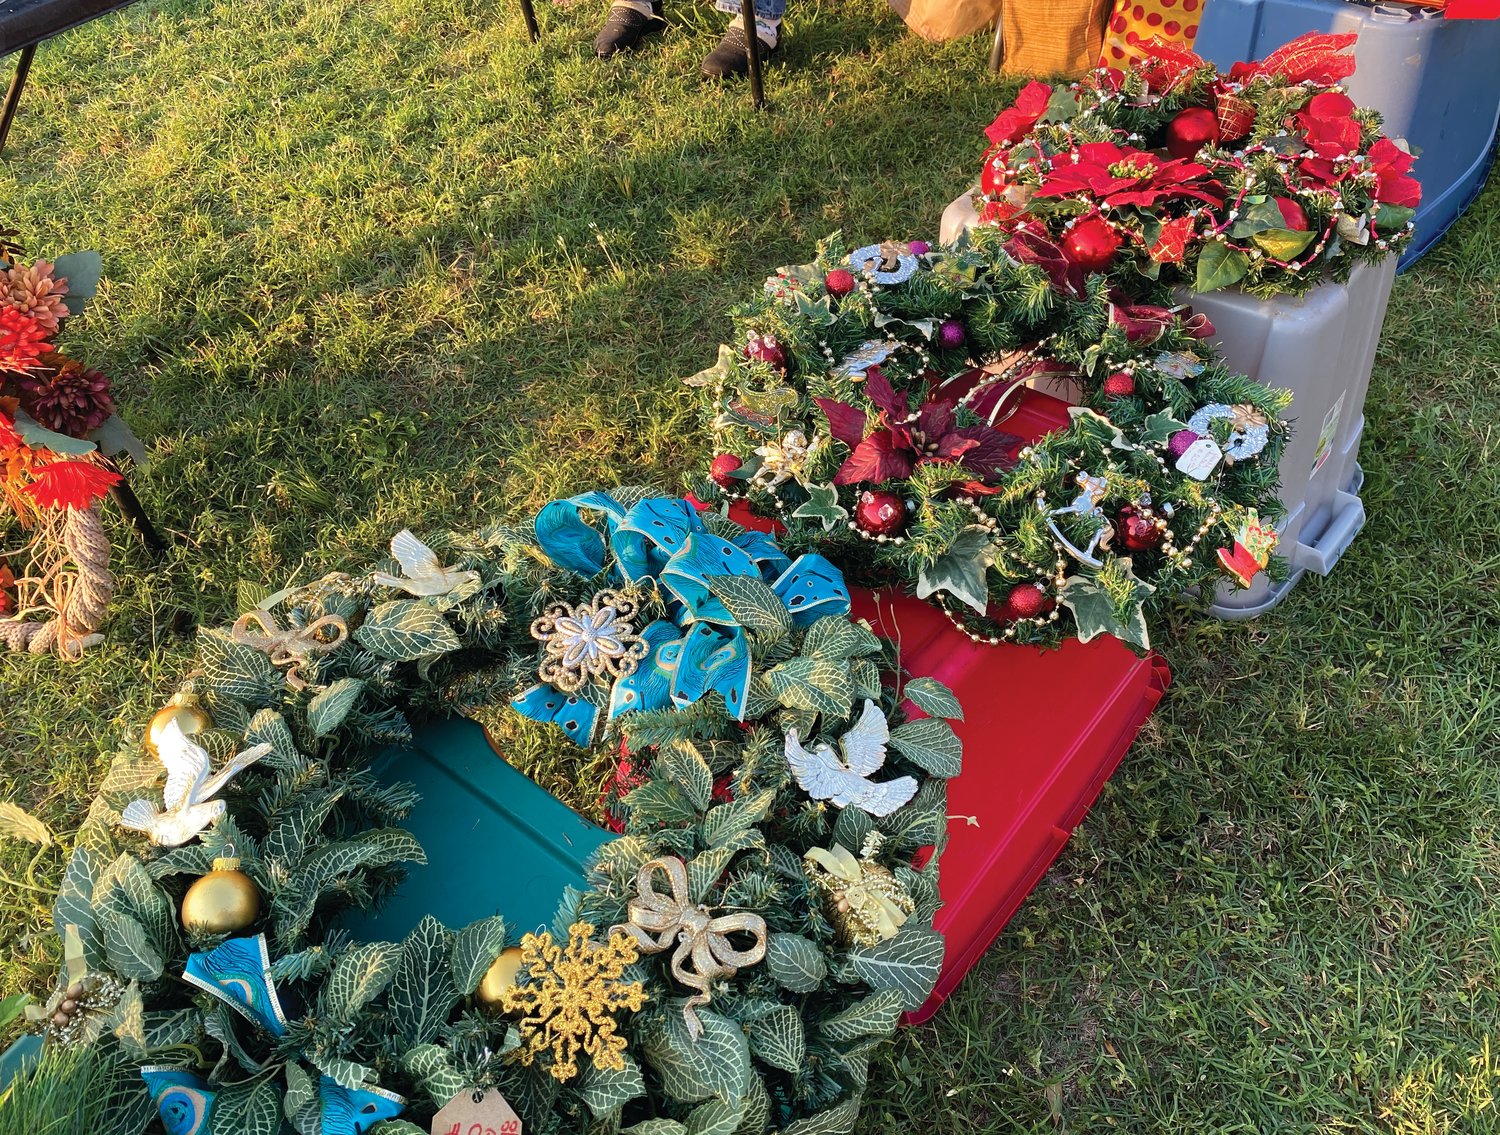 Some of the wreaths made with Christmas ornaments by Charlie Deschiel, She trained in floral design.